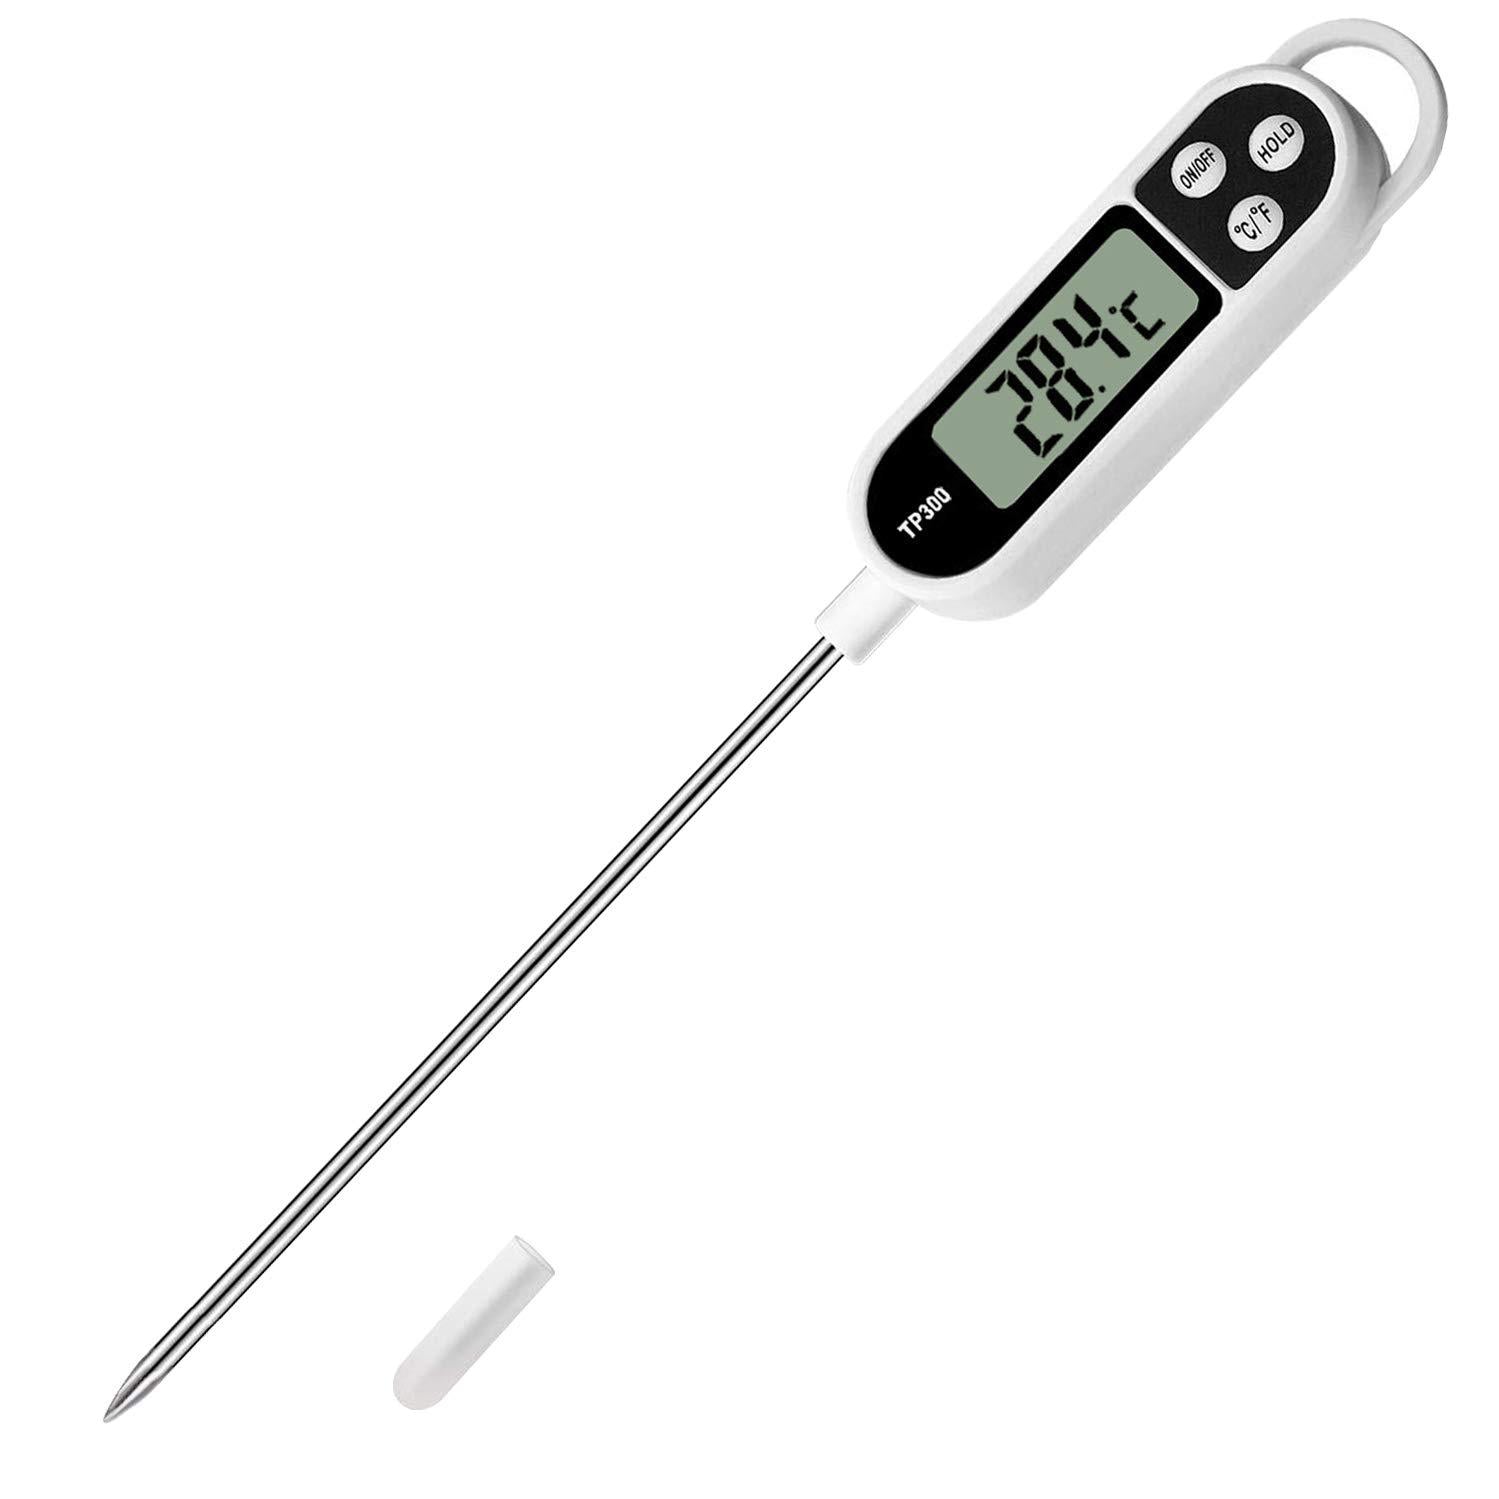 NANGOALA, Meat Food Candy Thermometer, Probe Instant Read Thermometer, Digital Cooking Kitchen BBQ Grill Thermometer with Long Probe for Liquids Pork Milk Yogurt Deep Fry Roast Baking Temperature